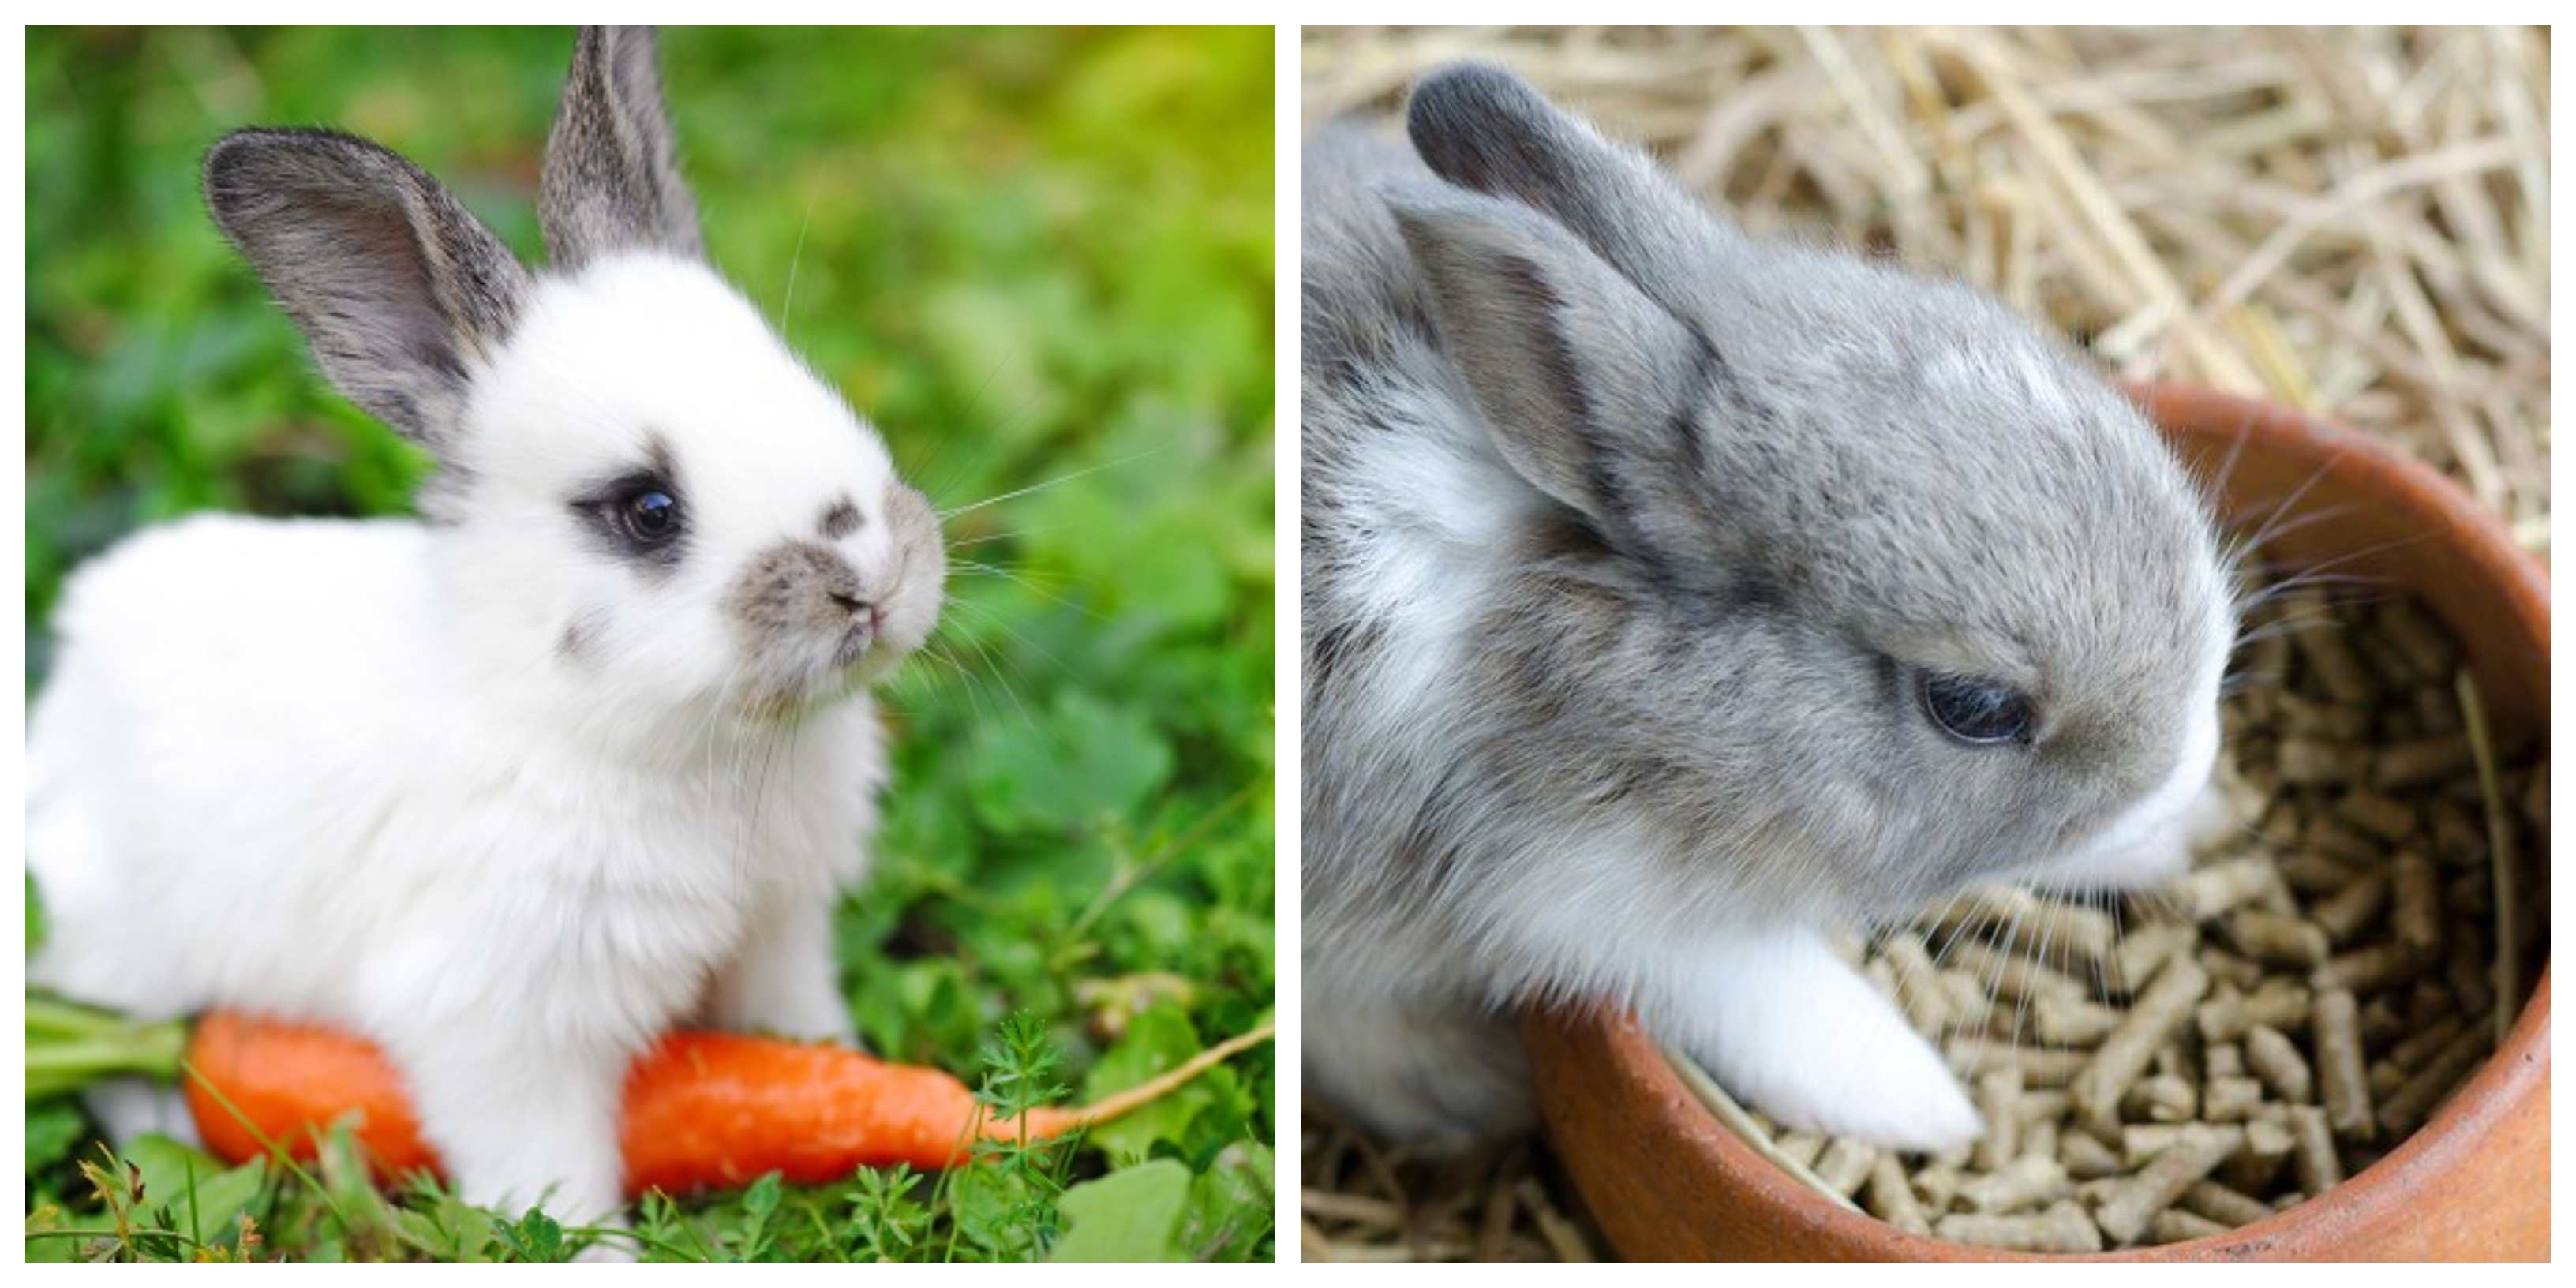 What can rabbits eat?